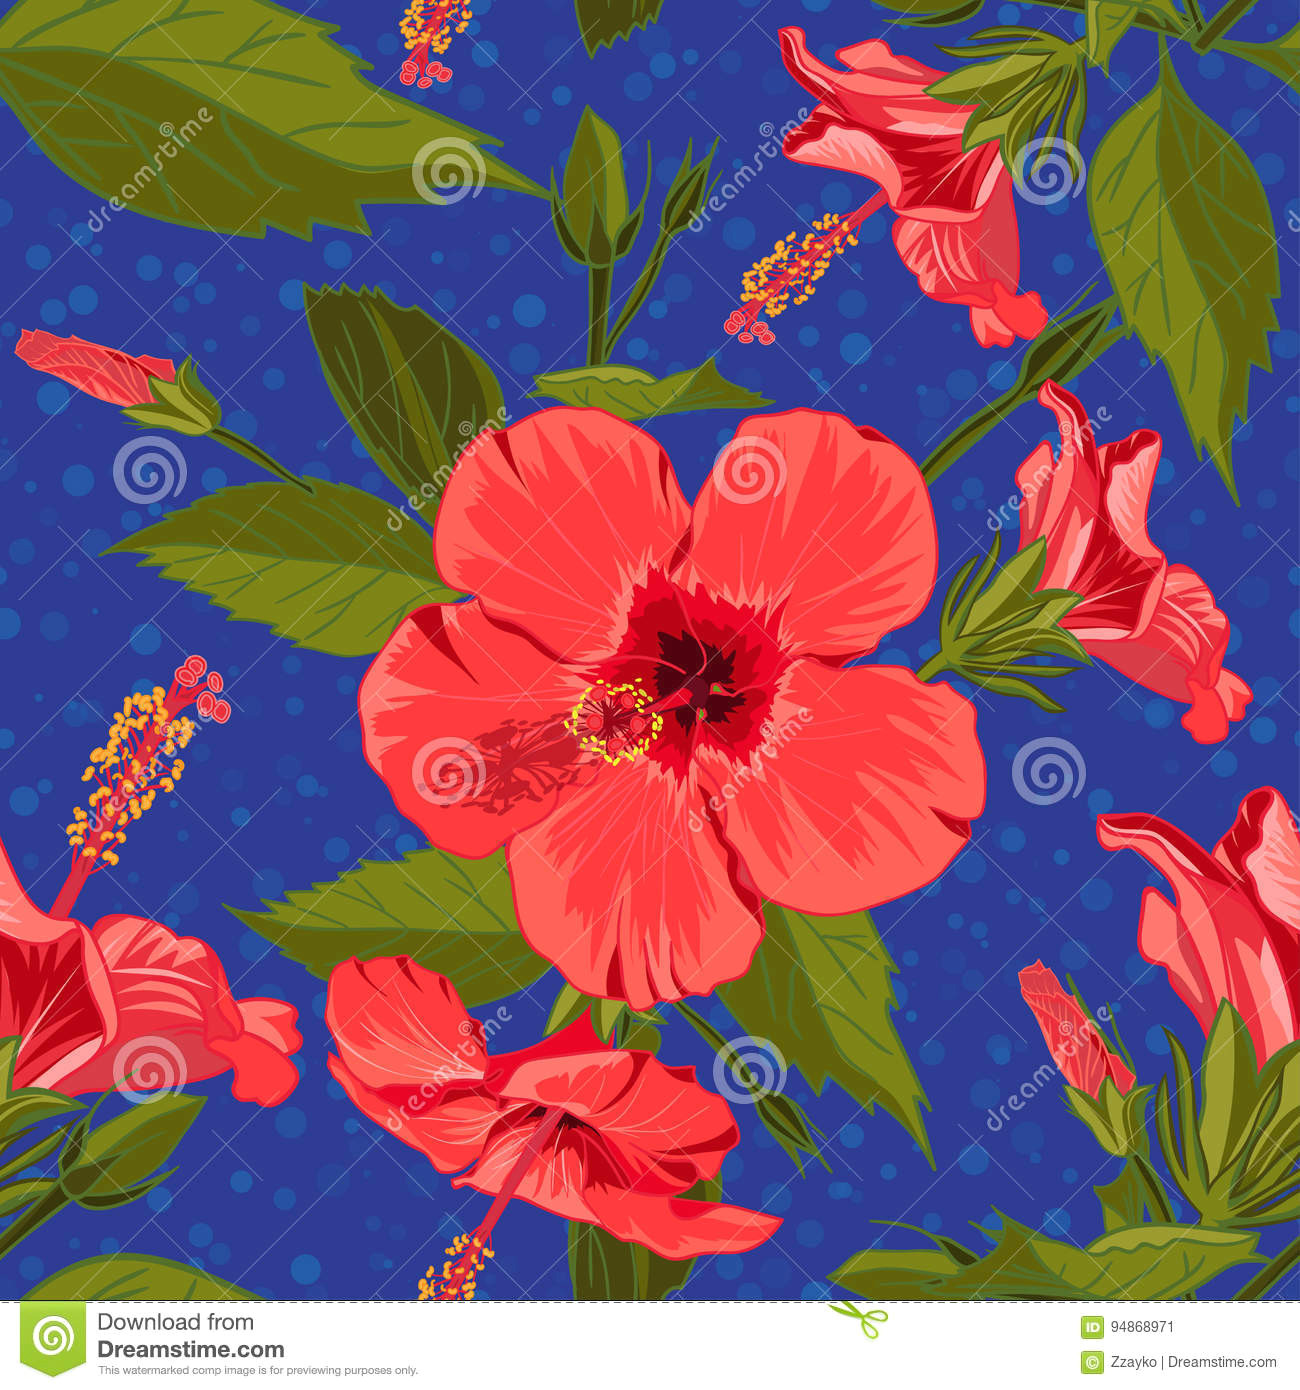 Drawings Of Exotic Flowers Seamless Hand Drawn Tropical Pattern with Jungle Exotic Hibiscus